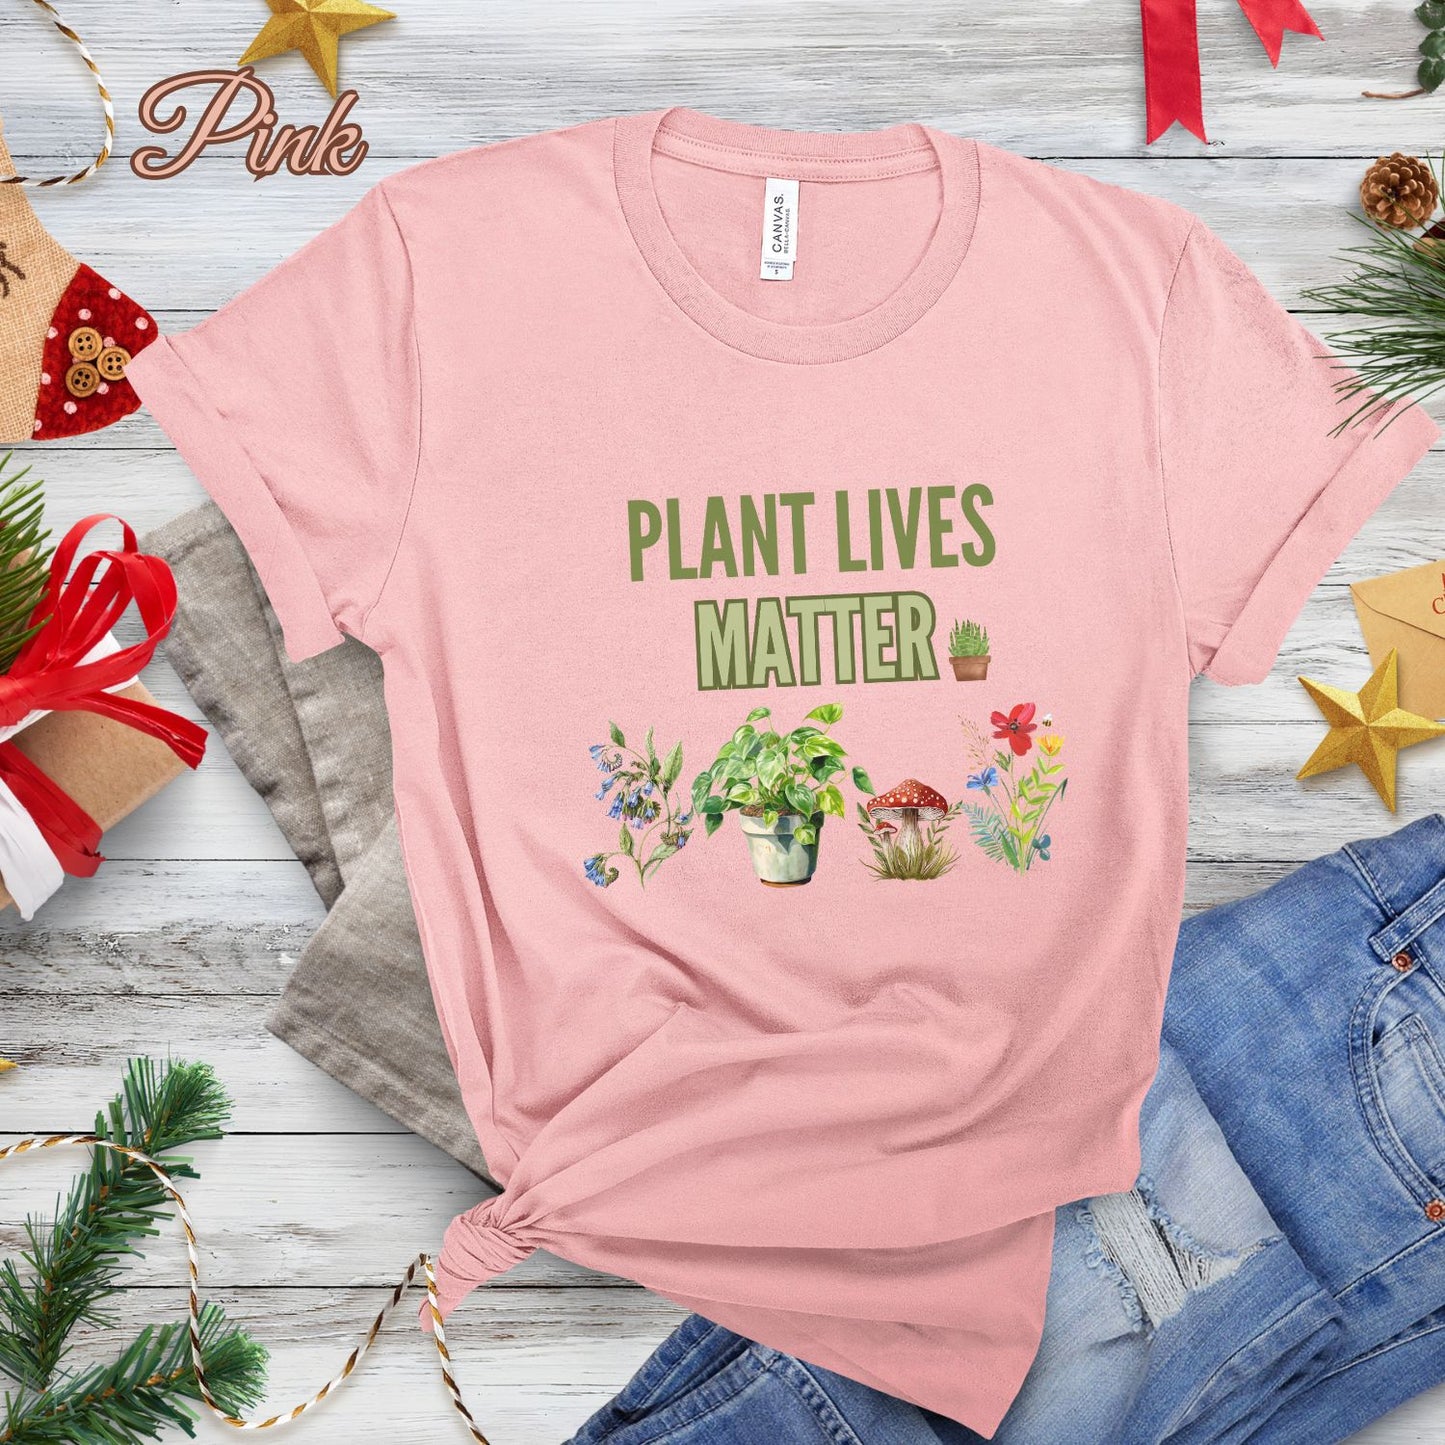 Plant Lives Matter Shirt - Advocacy for Plant Conservation and Environmental Awareness T-Shirt   